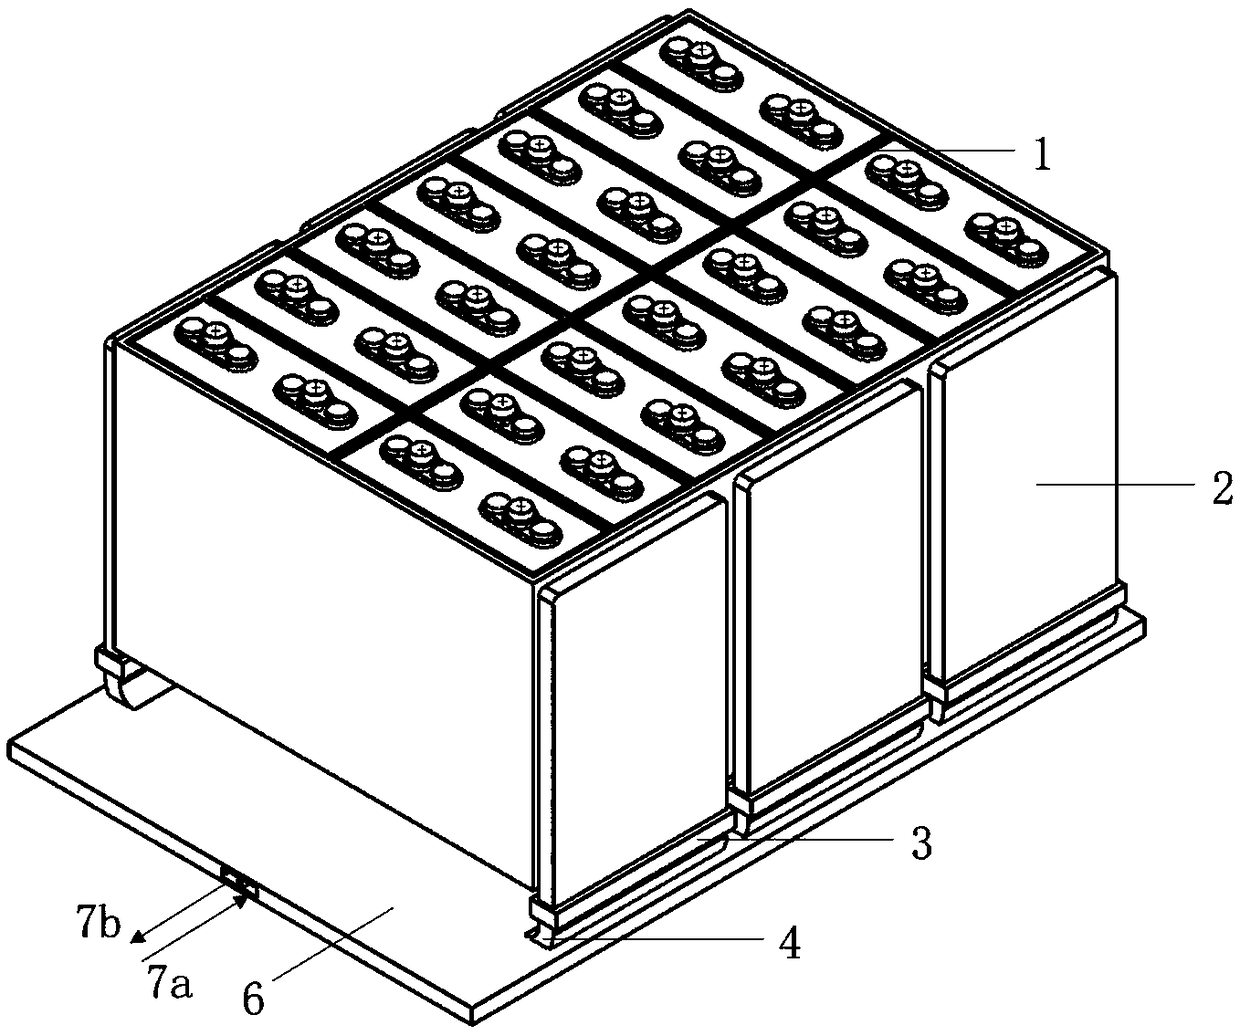 Battery module-based integrated heat exchange structure